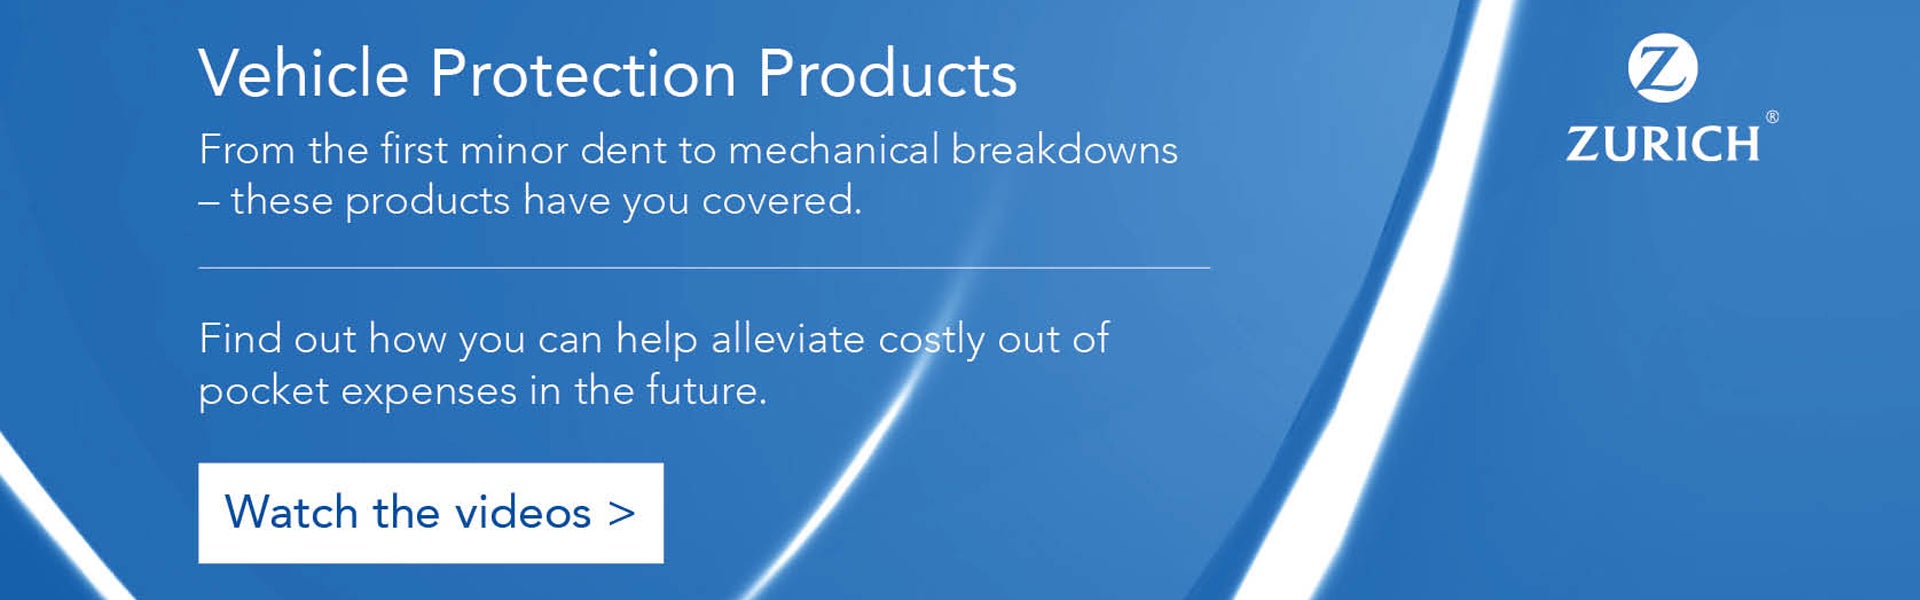 Vehicle Protection Products | Watch the videos